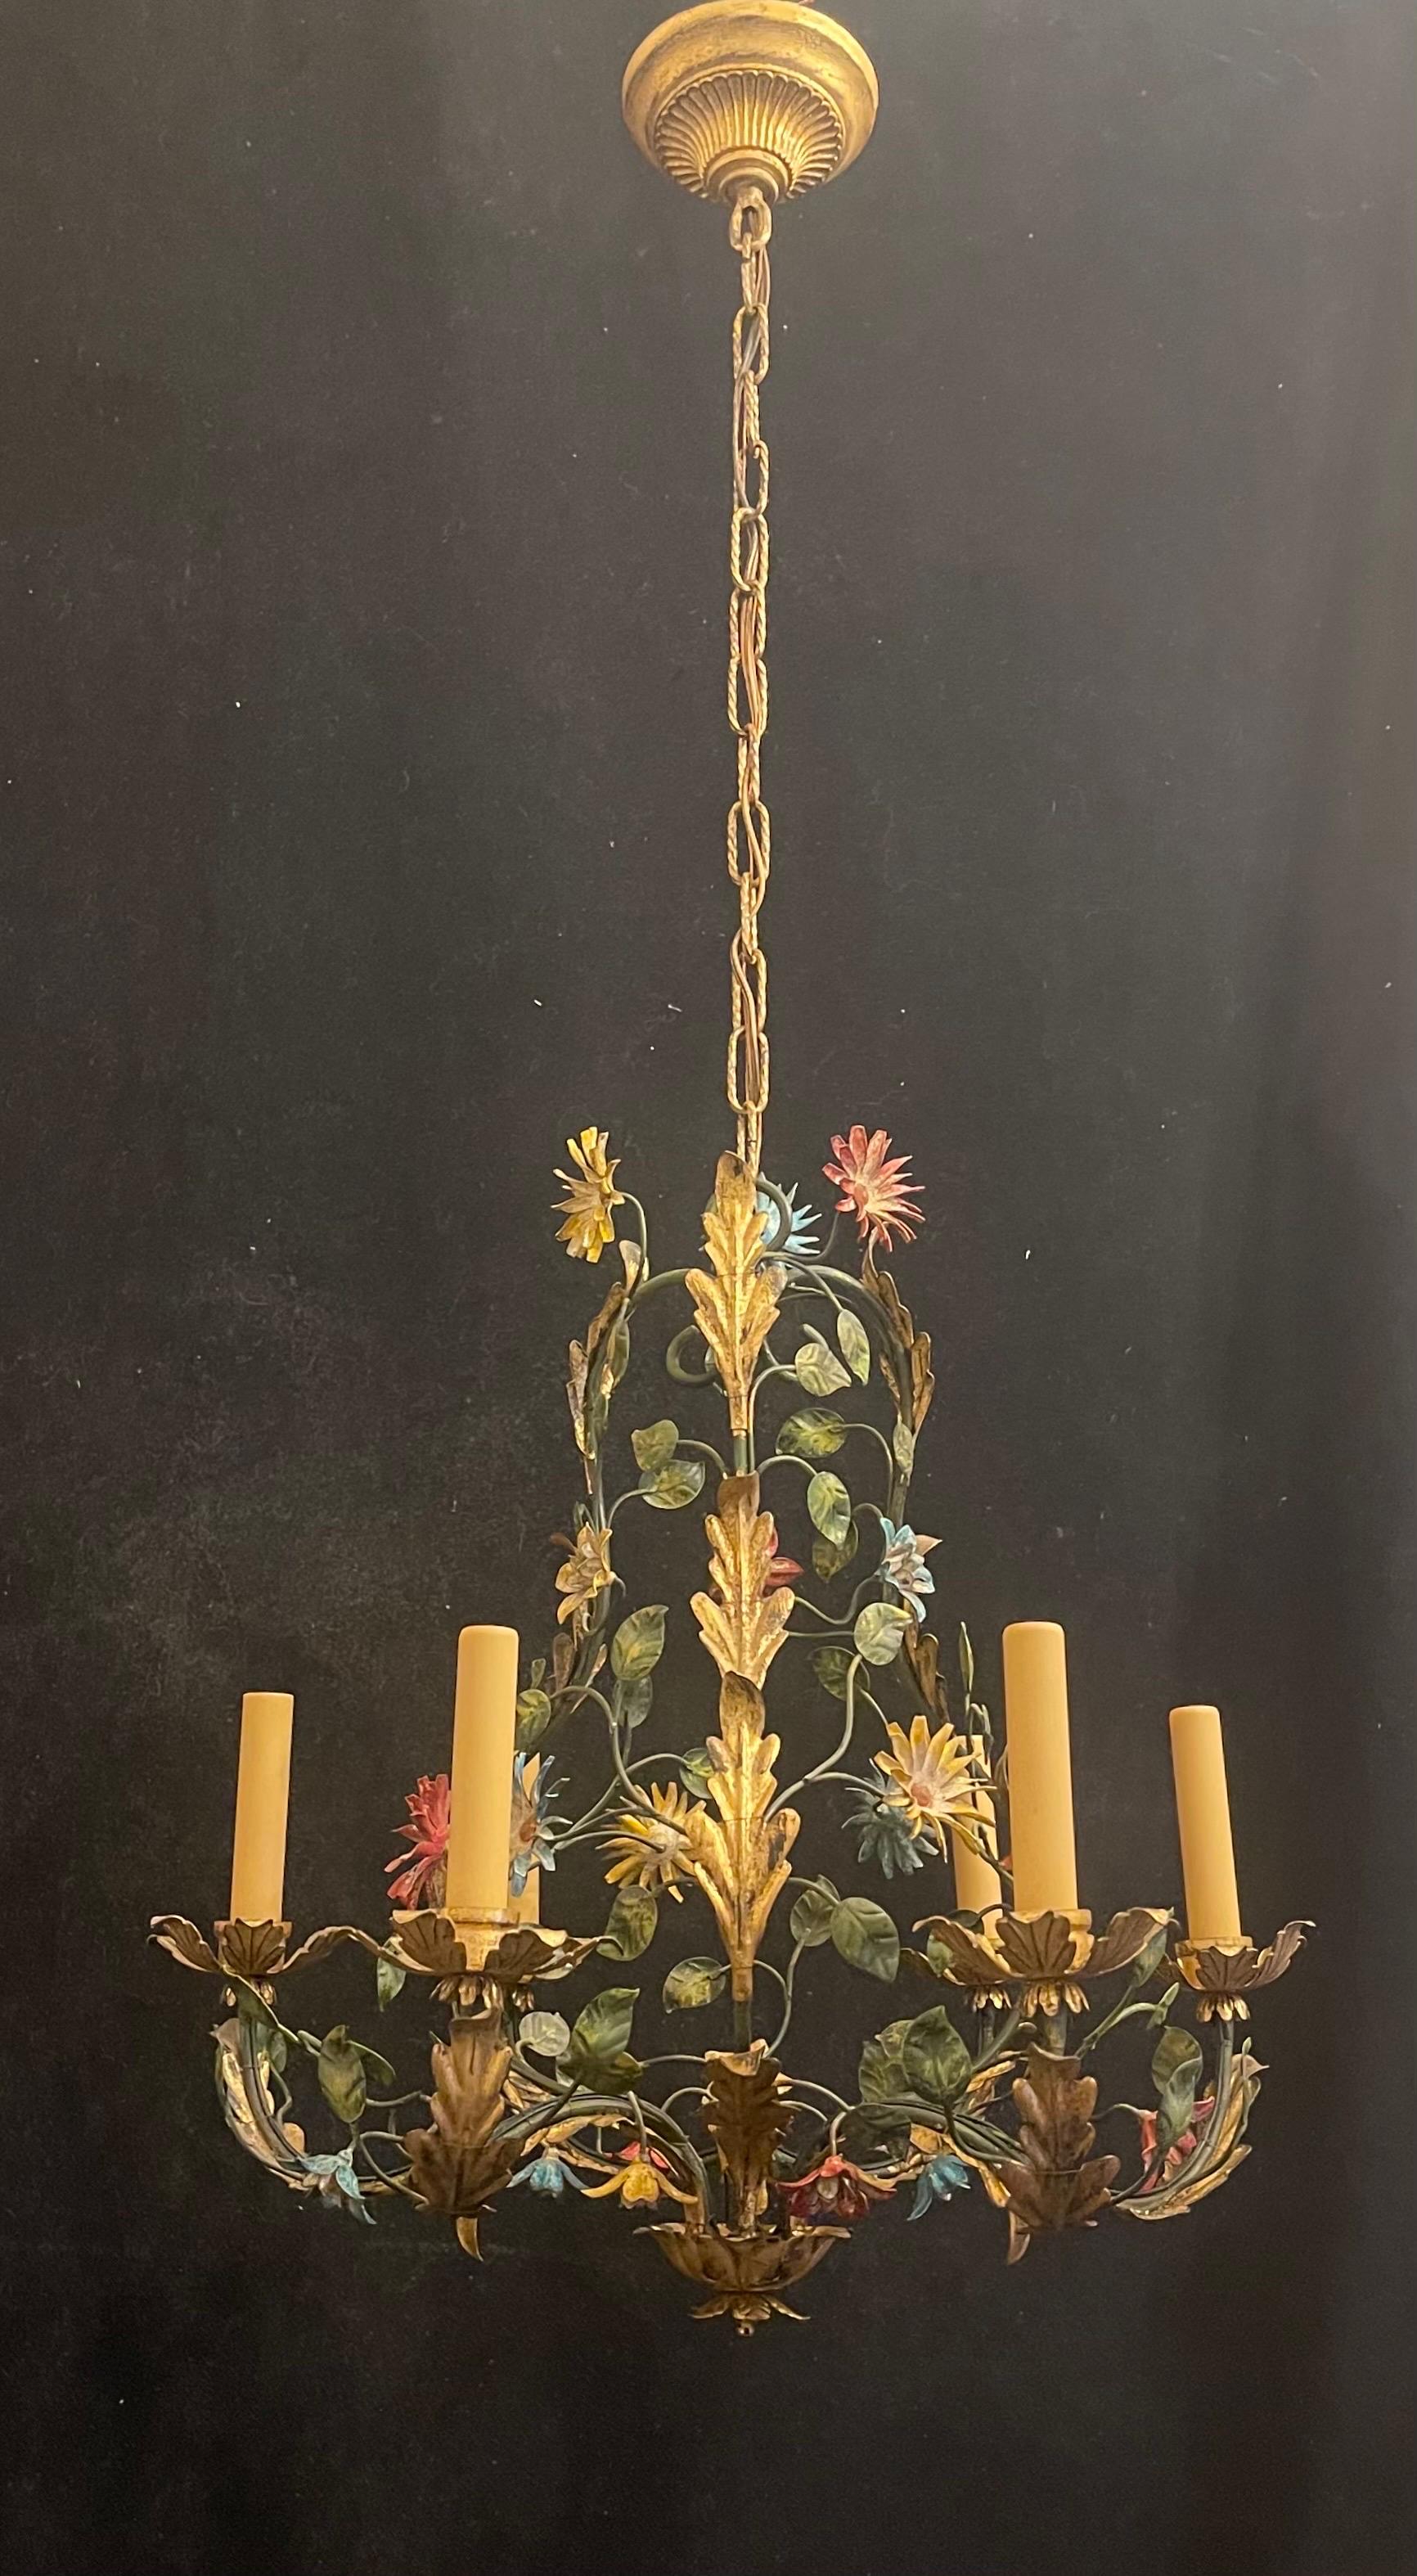 A wonderful and very fine shabby chic Italian gold gilt tole polychrome 6 candelabra light fixture in a basket form chandelier.
Wiring has been updated and comes with chain, canopy and mounting hardware for installation.